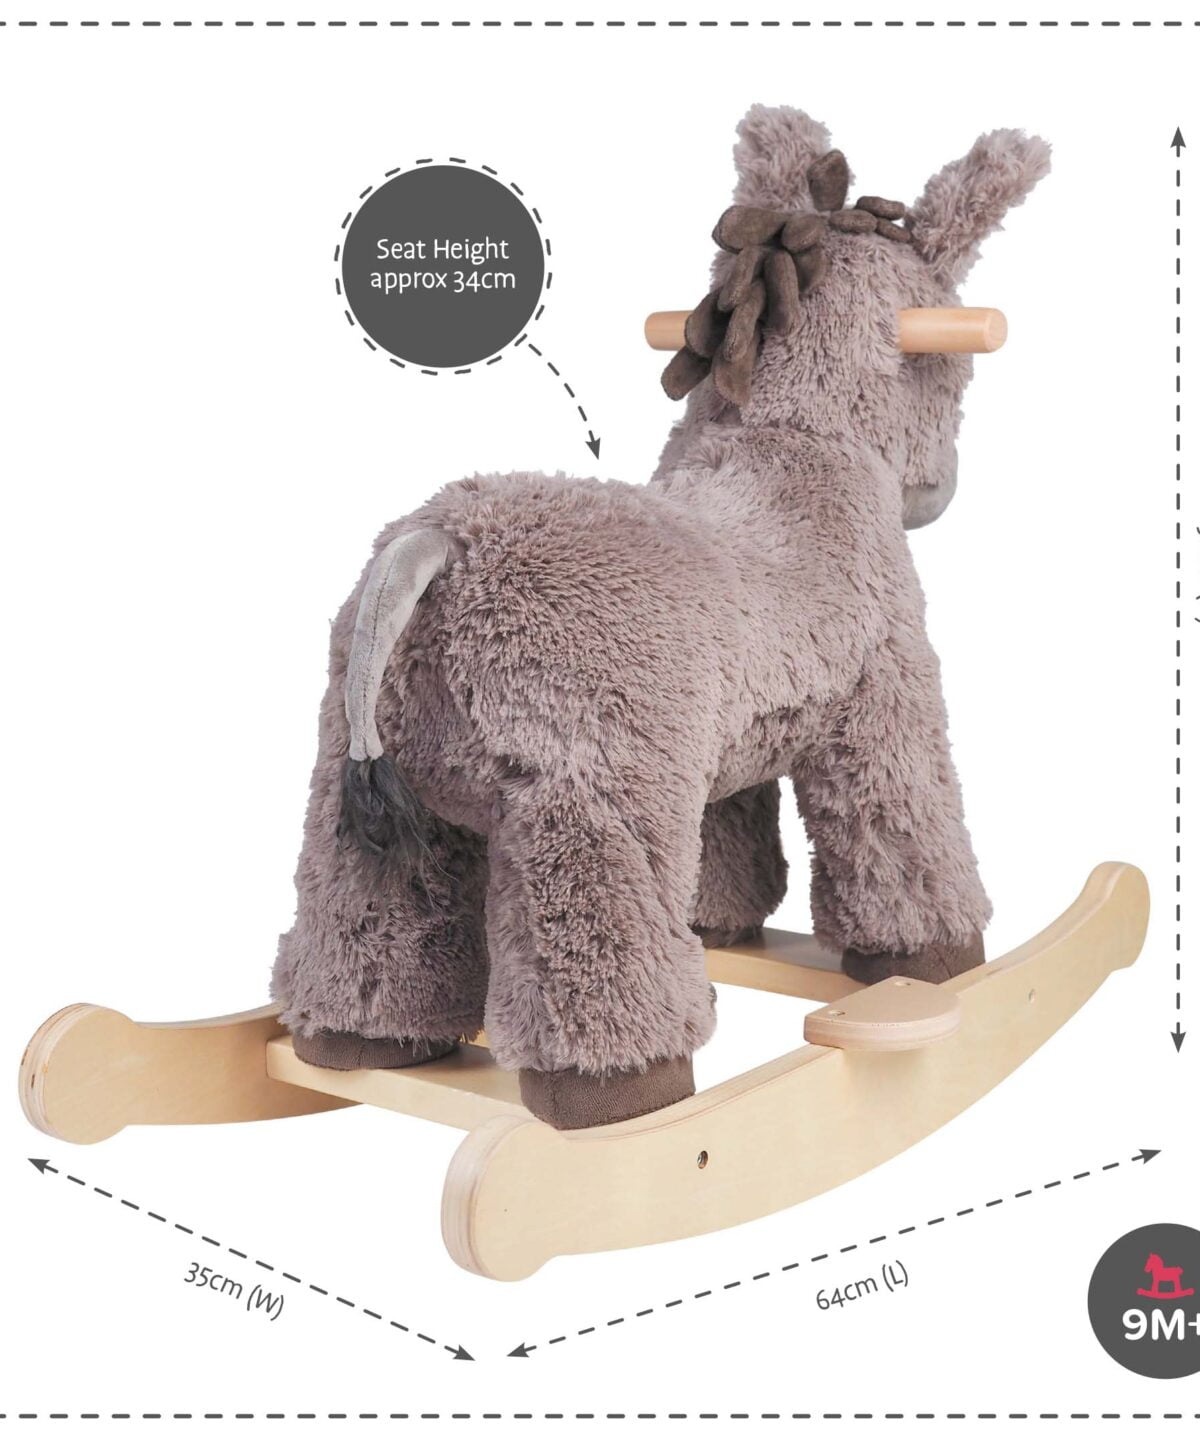 Product dimensions displayed for Norbert Rocking Donkey